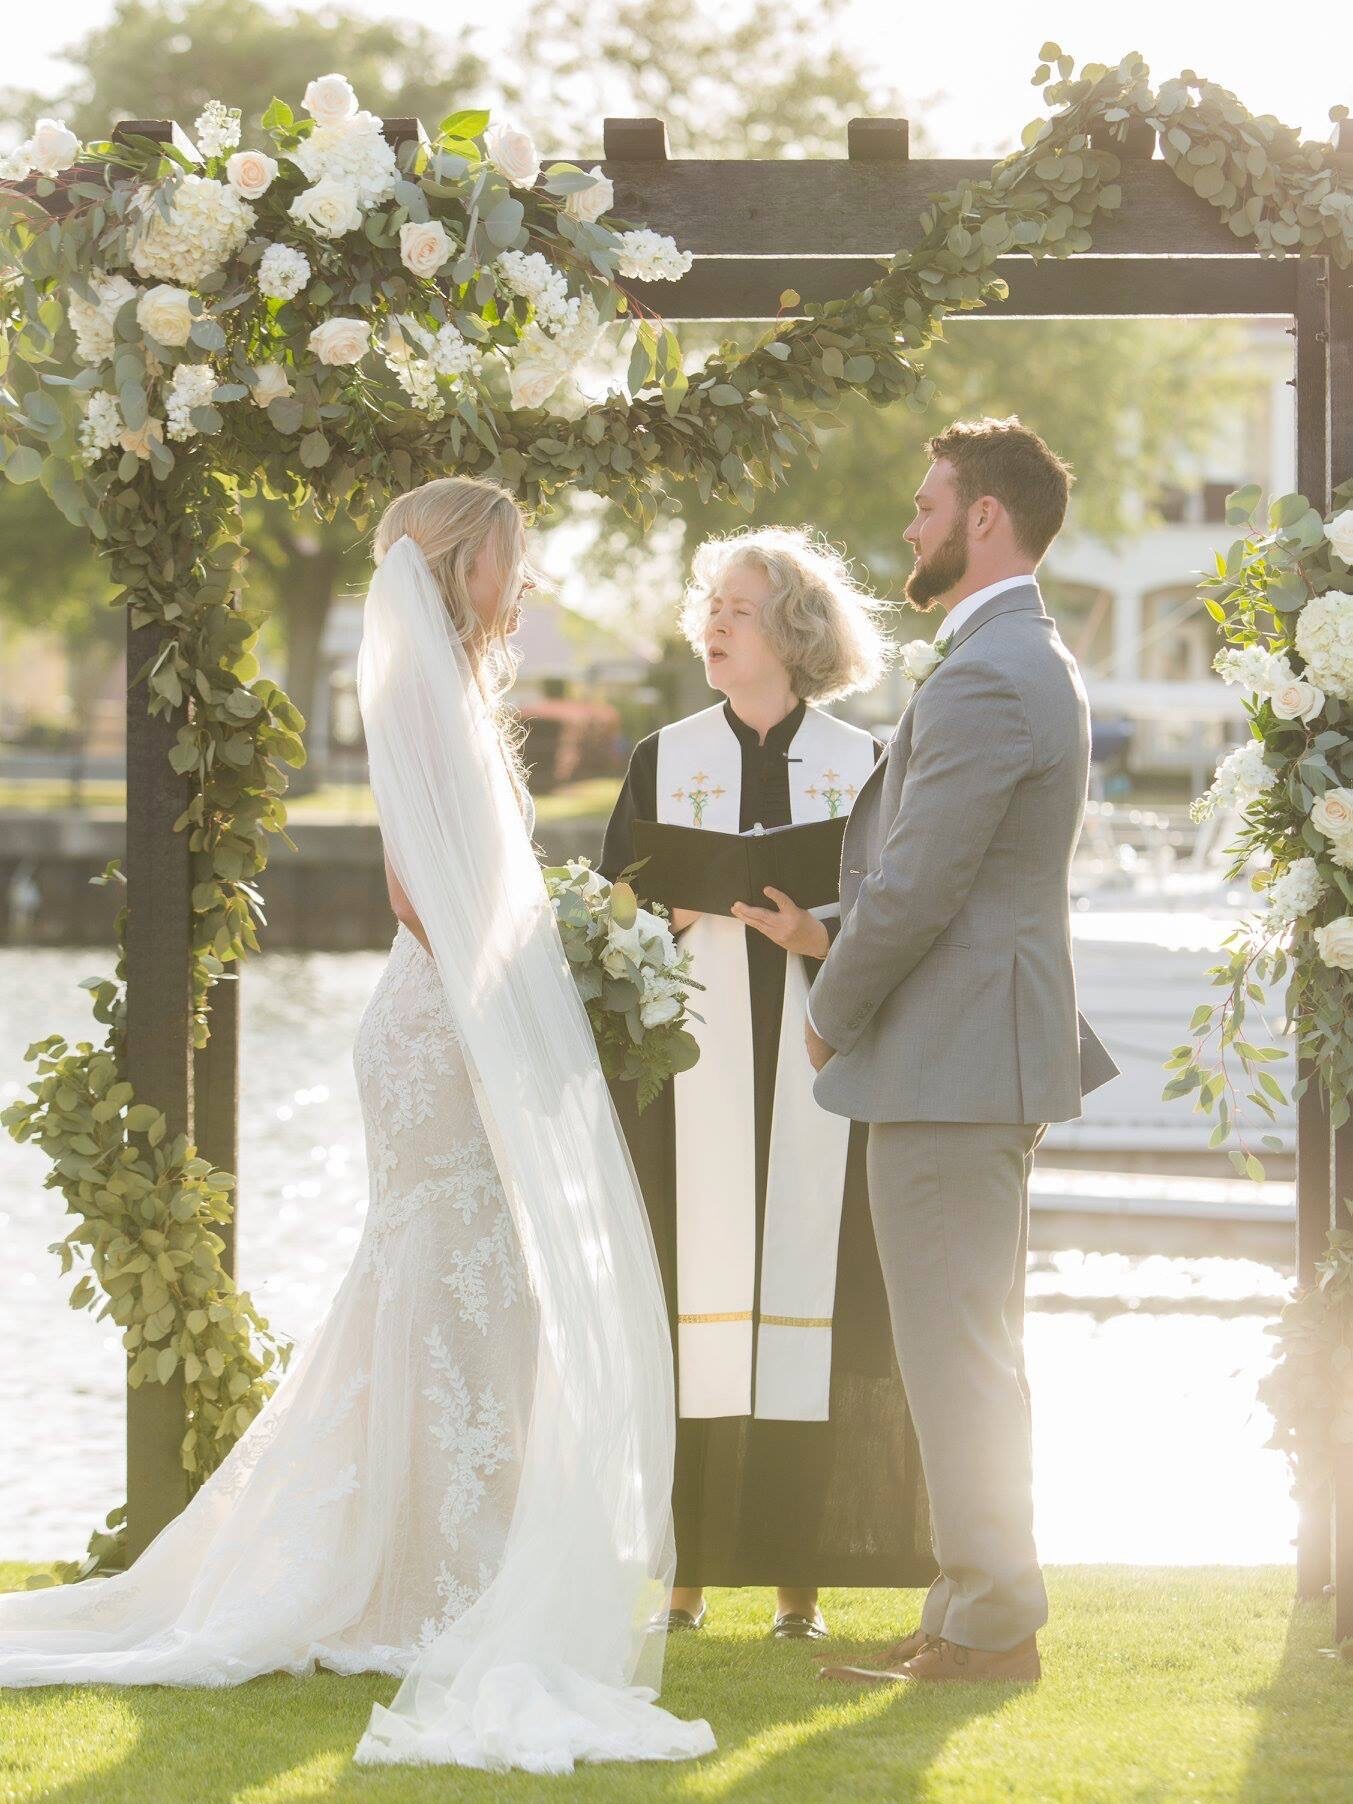 Pick the perfect location and date for your Wedding in downtown on Palafox St in Pensacola, FL on the waterfront and here is an March Wedding Venue couple getting married on the green

